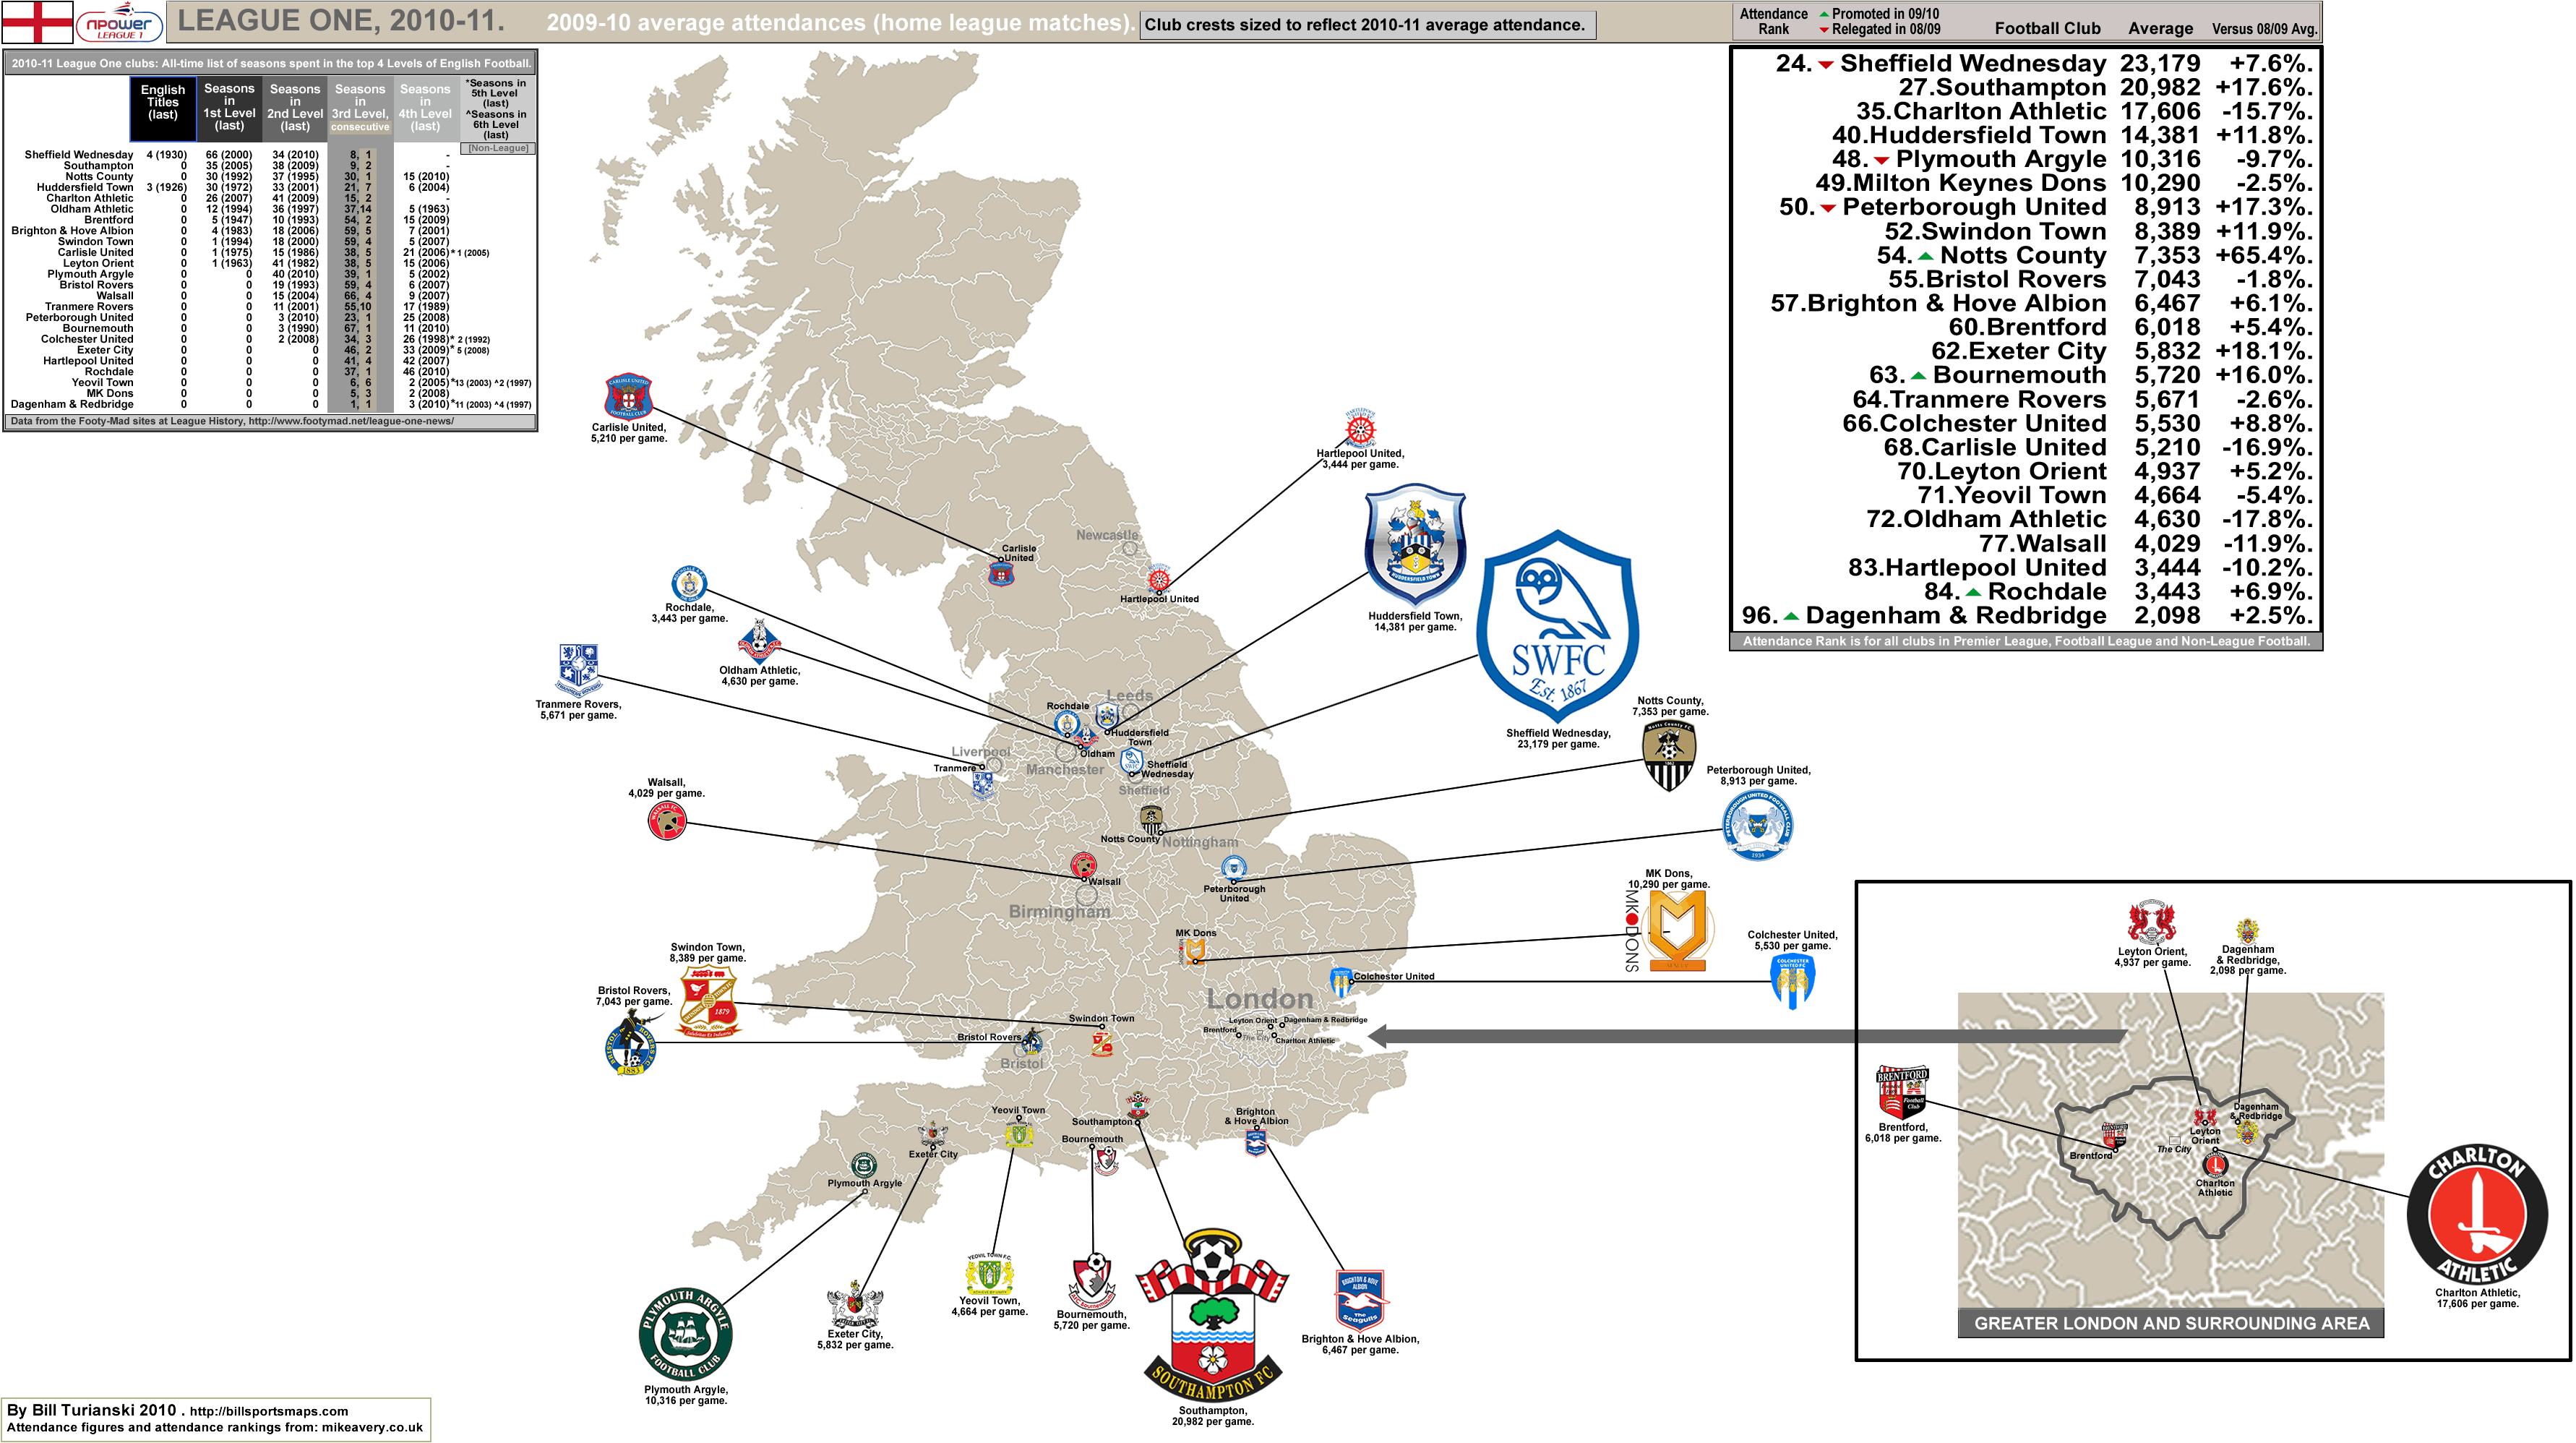 England: The Football League Championship, 2010-11 season – attendance map,  with average attendances and percent capacities (from 2009-10). «